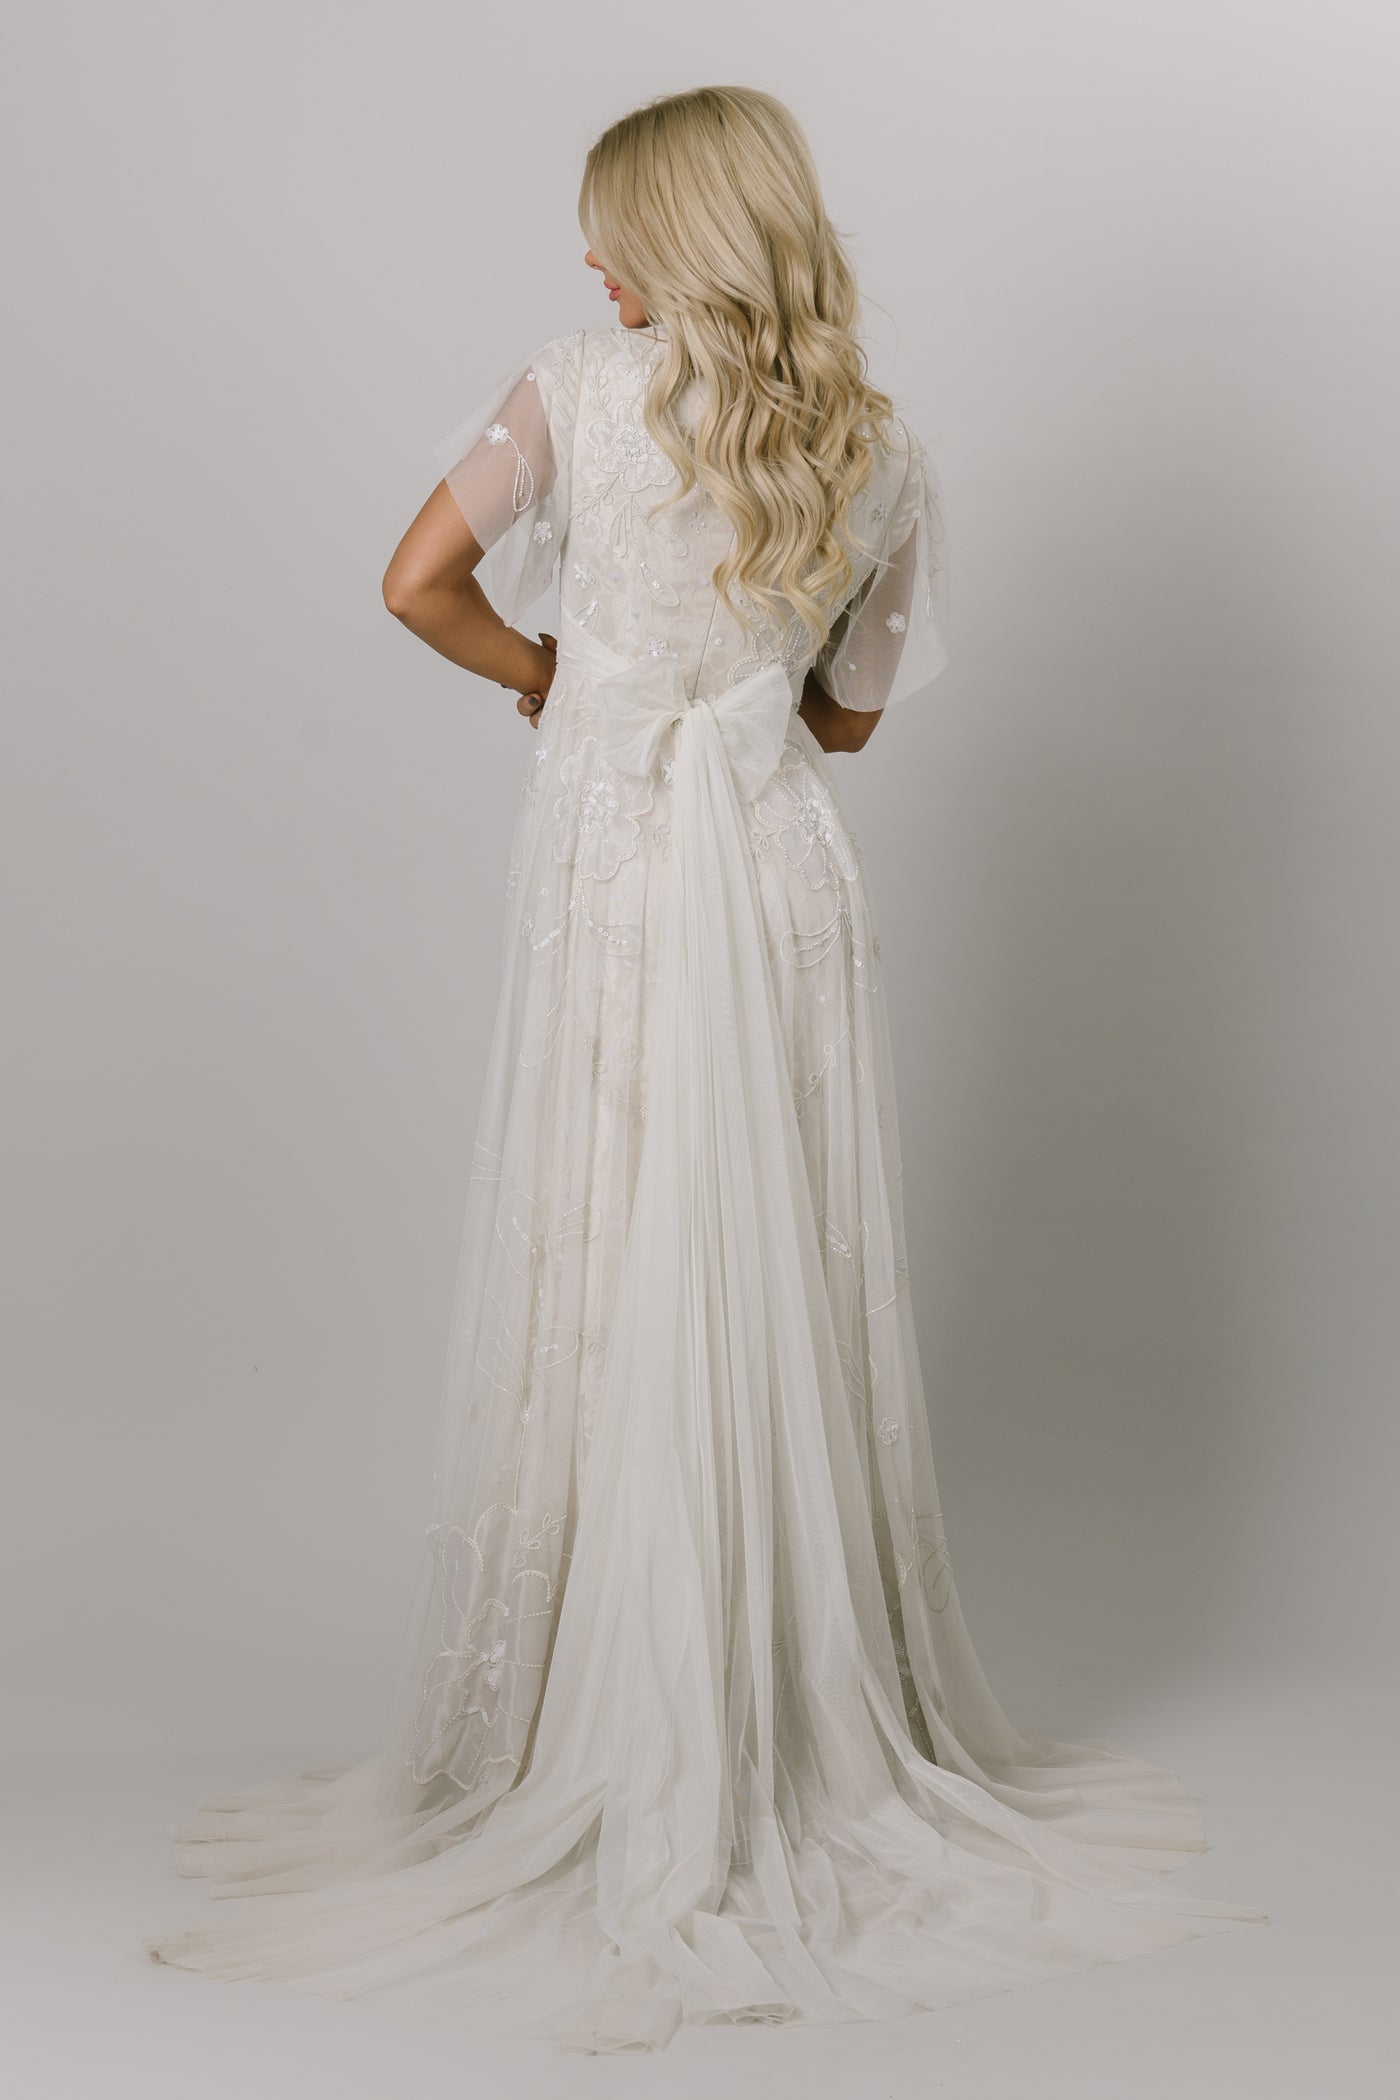 Back view of Moments Made Bridal dress with flutter sleeves and a line fit. It is covered in beautiful lace and beading. This modest wedding dress has the pattern has a flower like design.